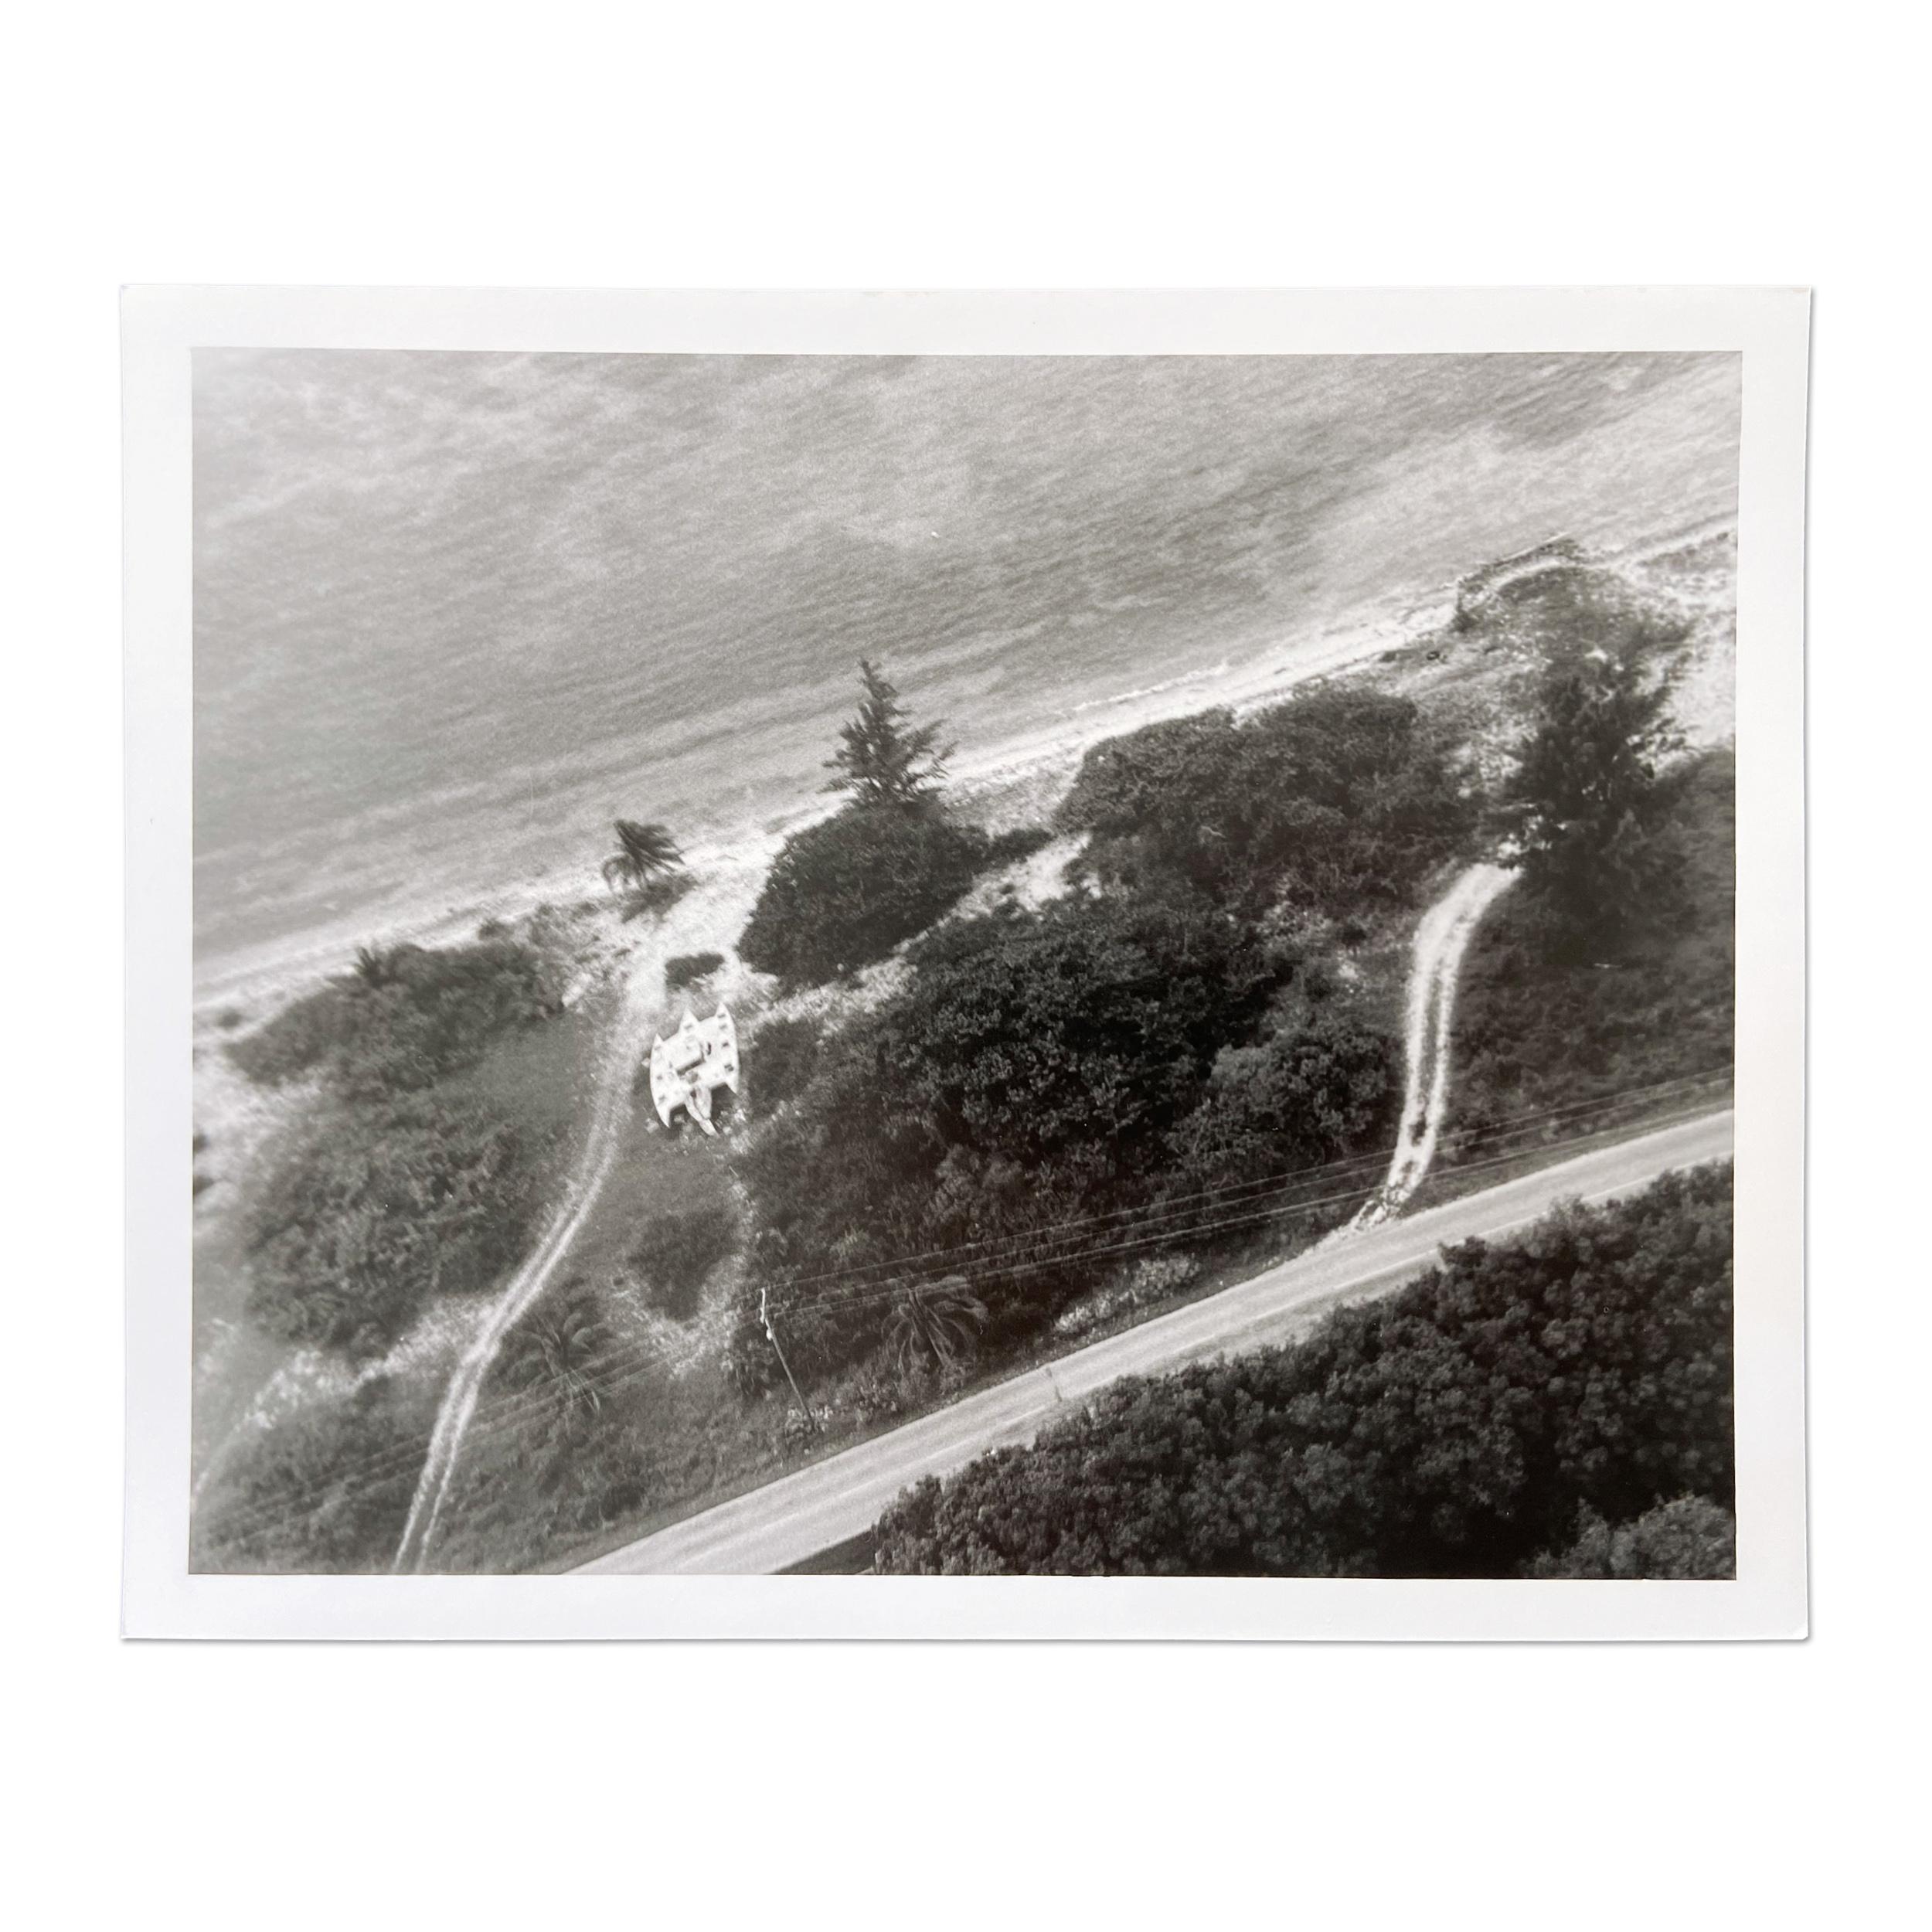 Tacita Dean (British, born 1965)
Aerial View of Teignmouth Electron, Cayman Brac 16th of September 1998, 2000
Medium: Gelatin silver print on paper
Dimensions: 21 x 26 cm (8 1/4 x 10 1/4 in)
Edition of 100: Hand-signed, numbered and dated
